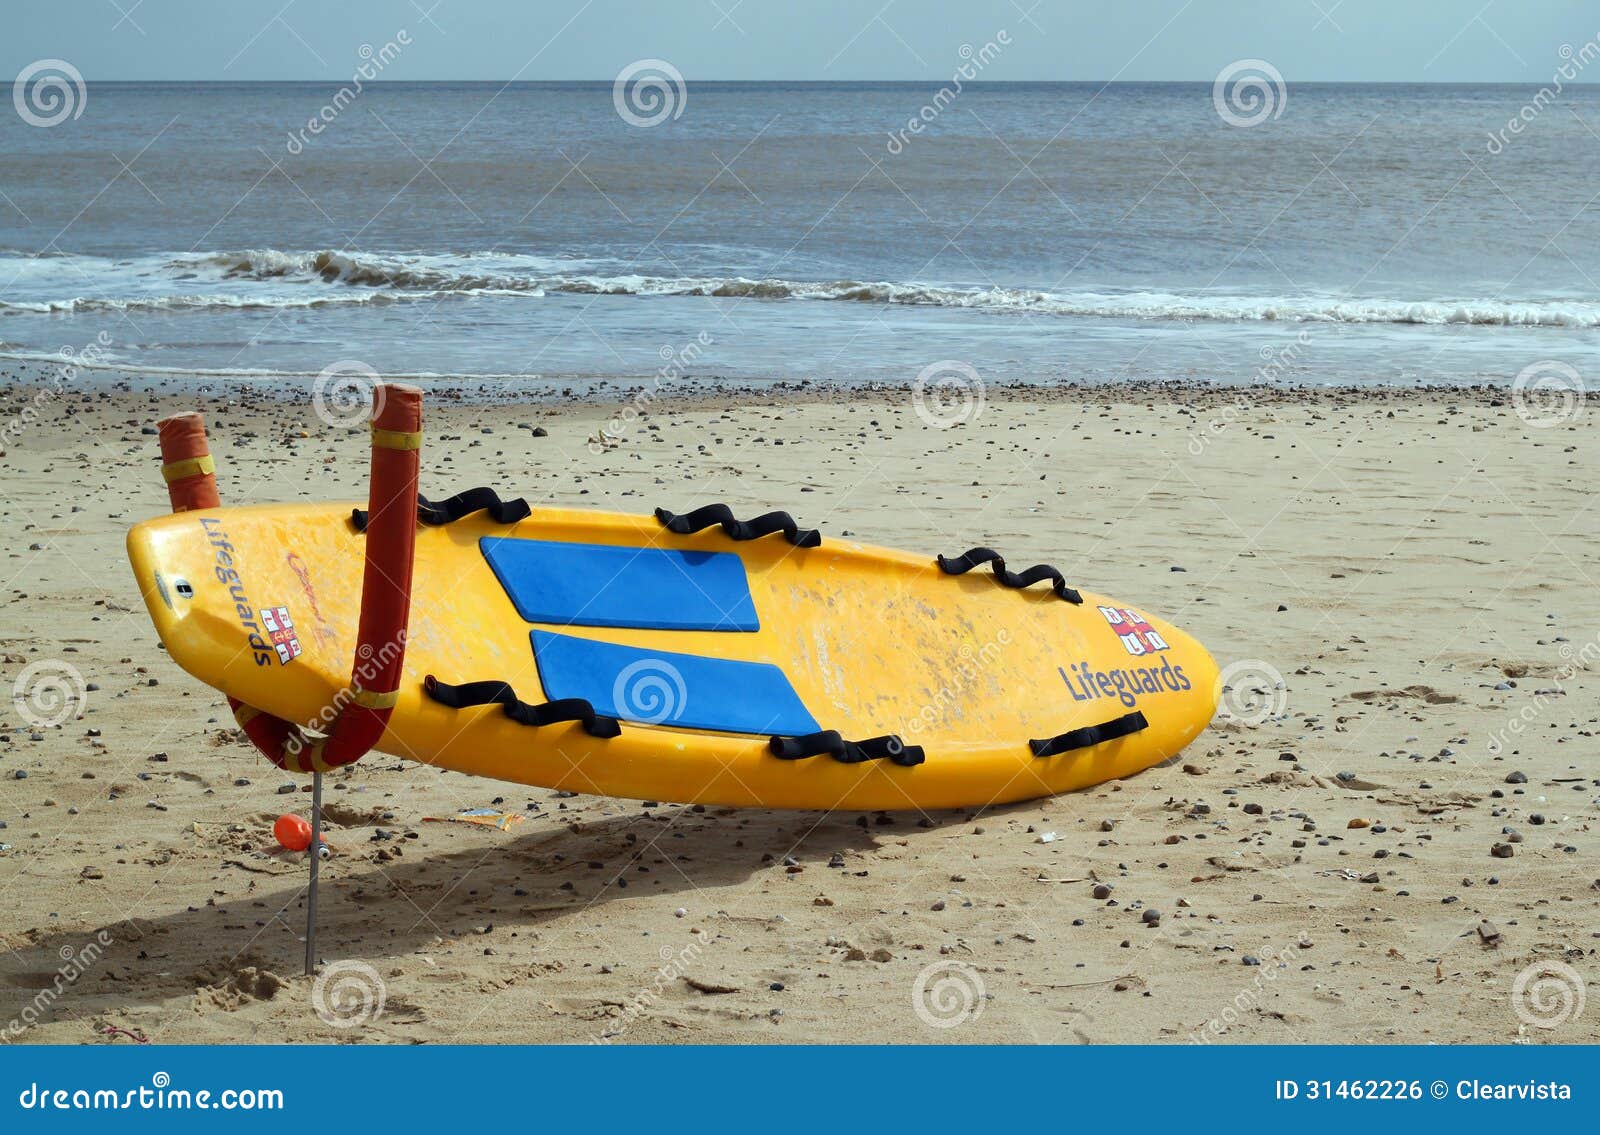 Lifeguards Surfboard on a Beach. Editorial Photo - Image of board, surf ...